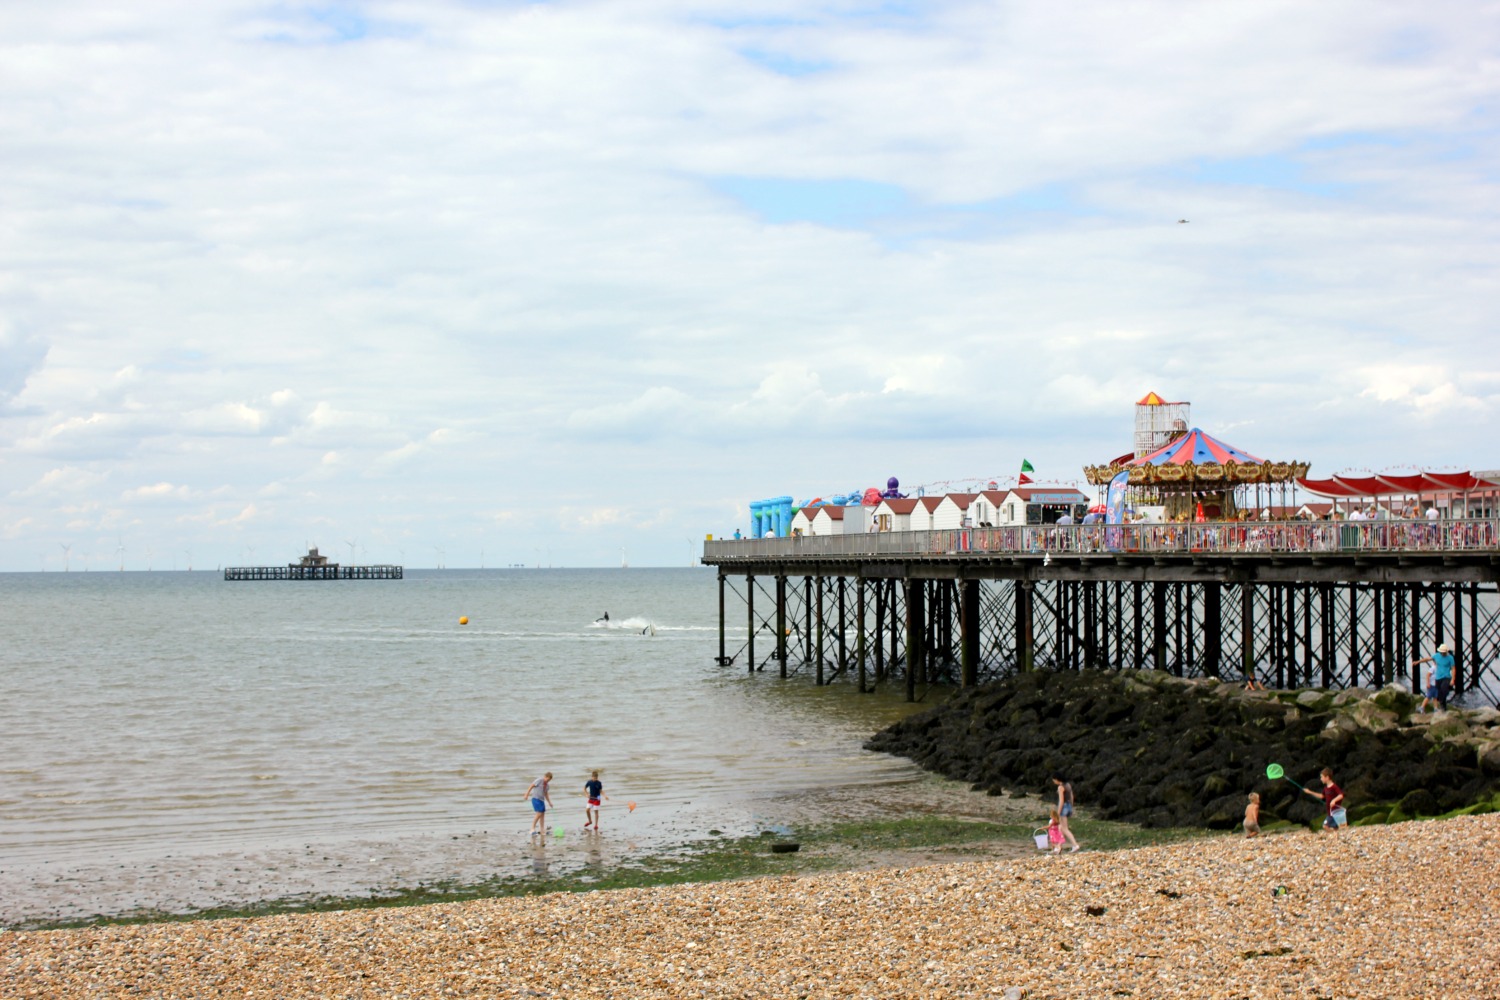 The view of the pier at Herne Bay in Kent on a summer day, with the funfair and classic carousel and people paddling - a great place for a day trip from London with kids